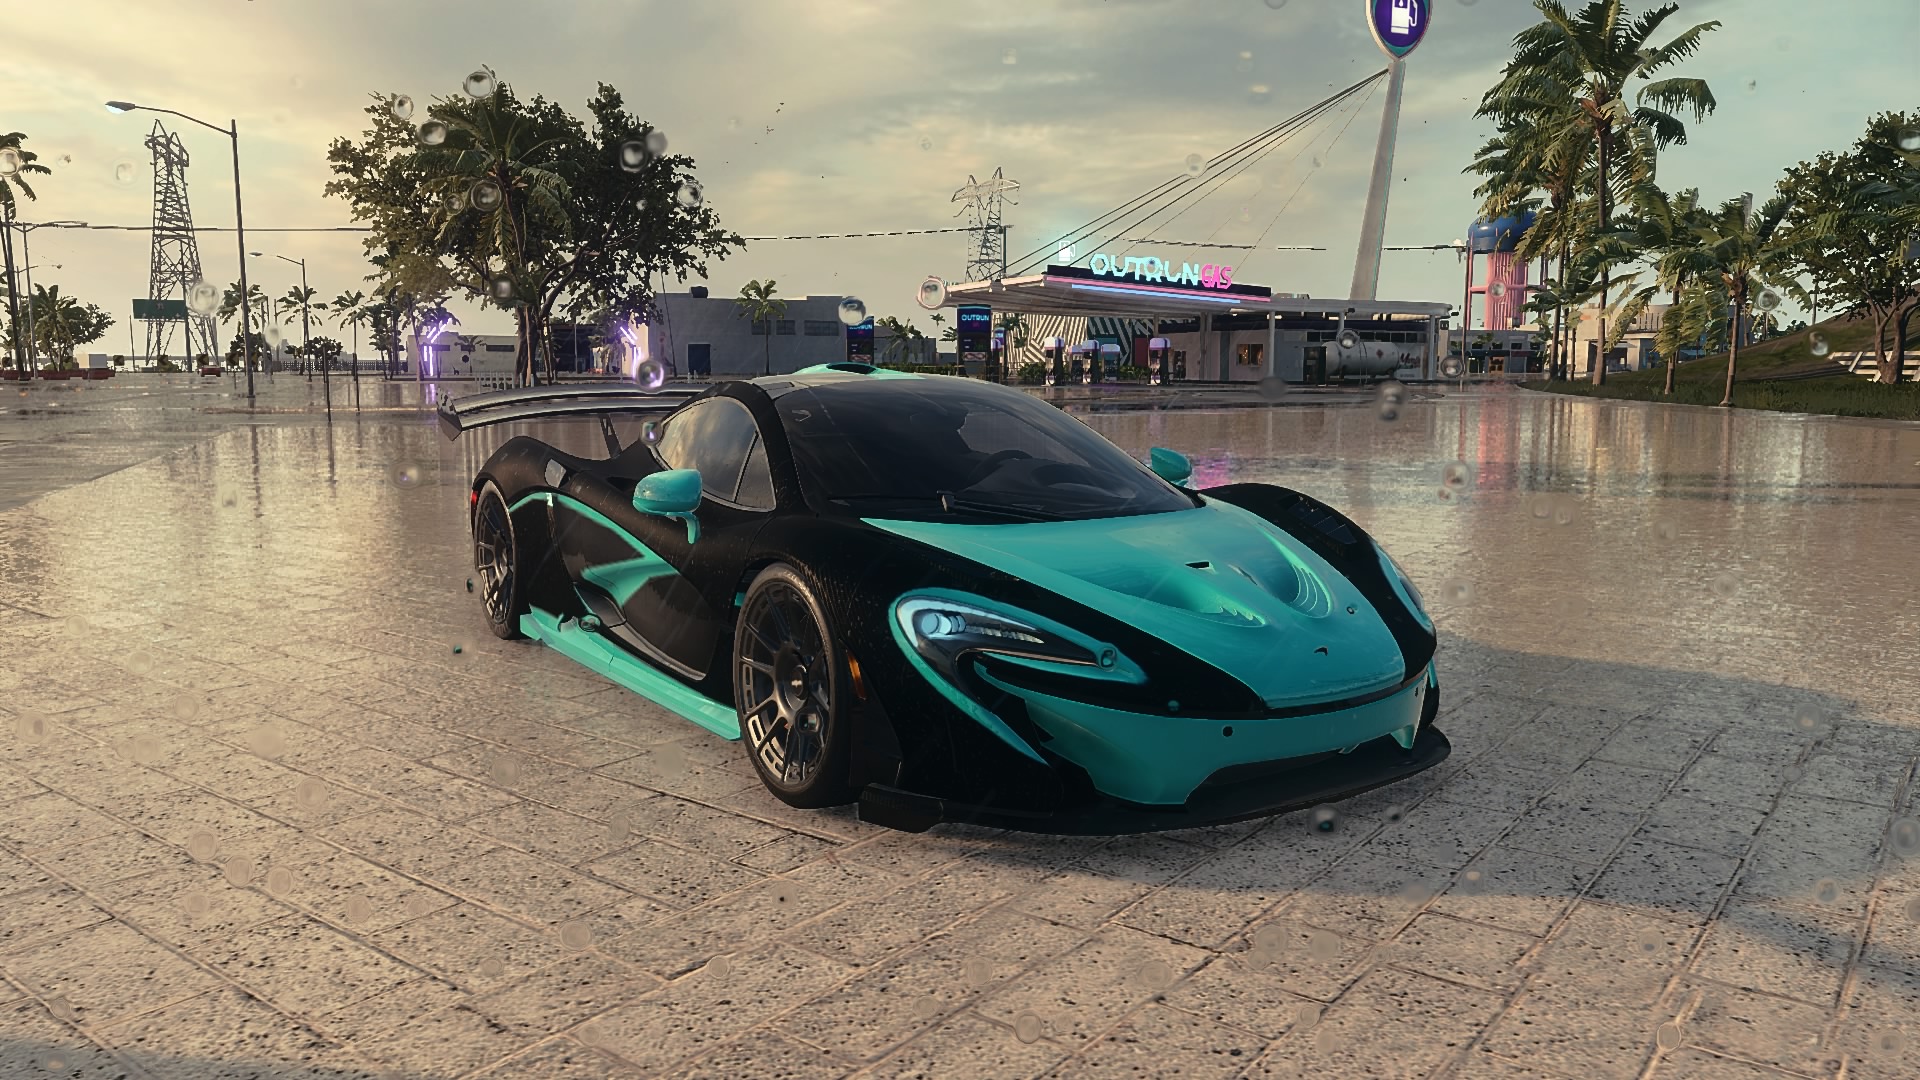 General 1920x1080 car Need for Speed: Heat light blue McLaren P1 gas station PlayStation 4 video game art screen shot video games frontal view headlights trees sky CGI wet power lines